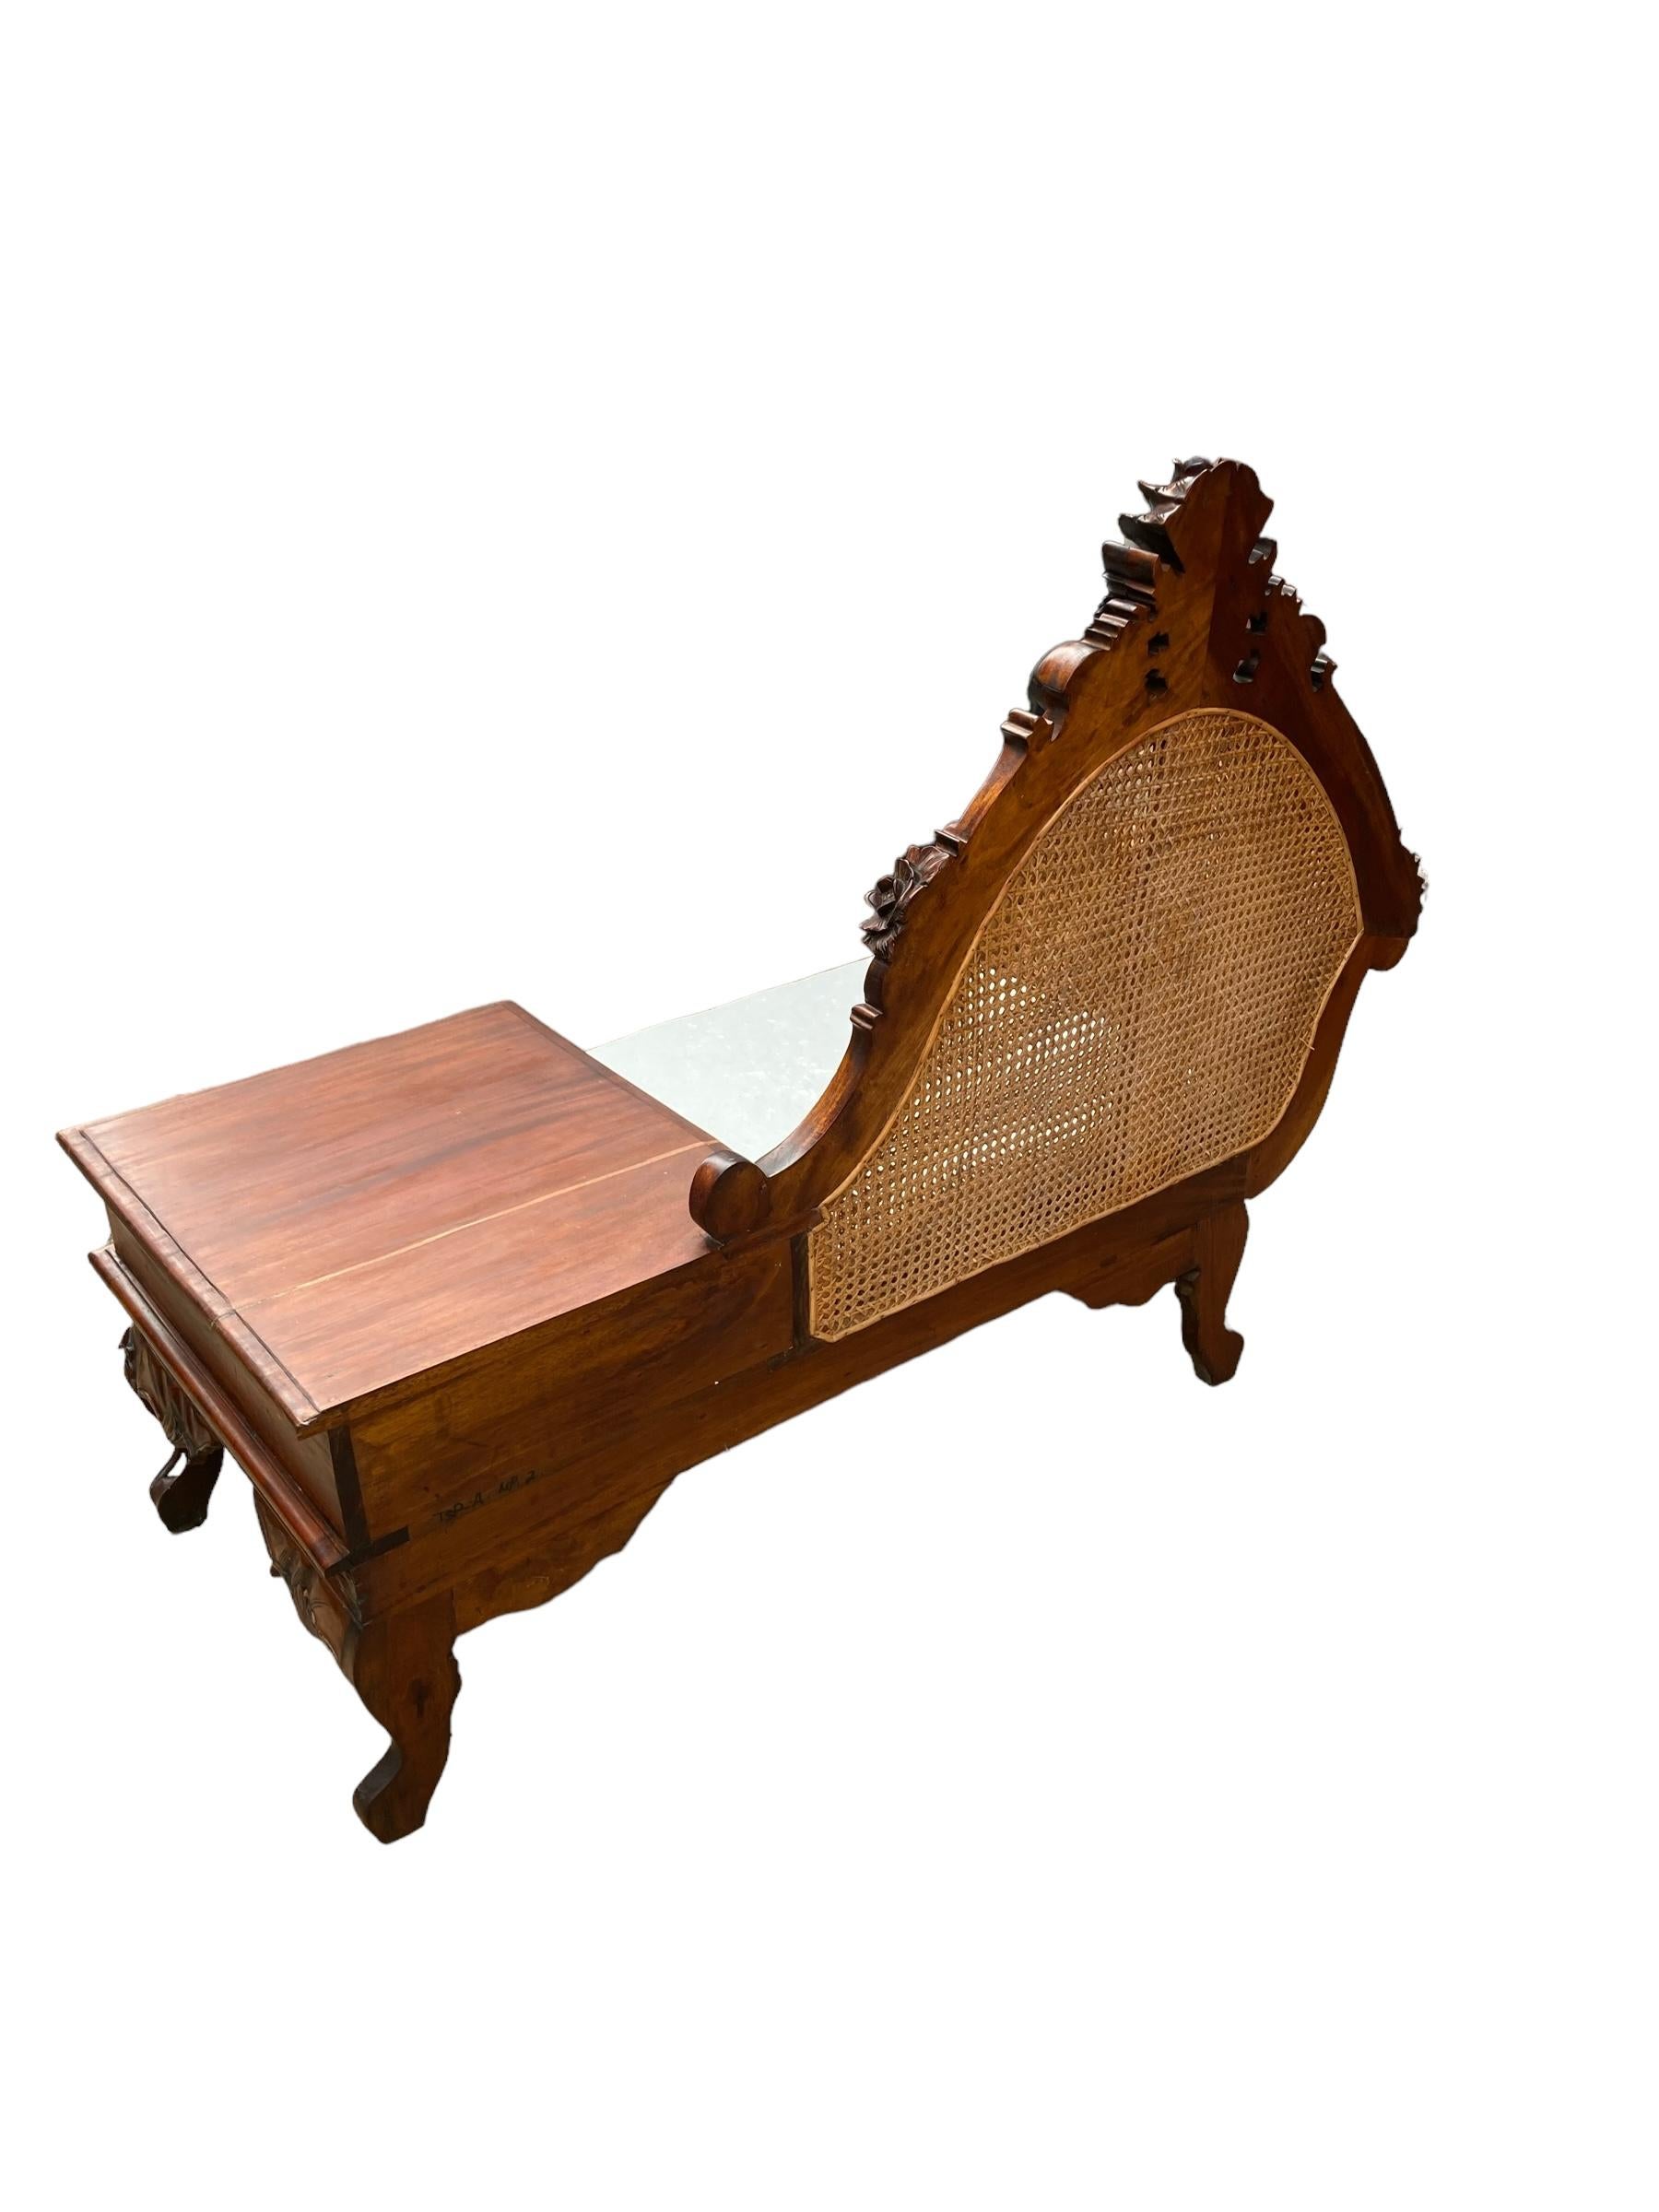 Bouclé Original Hand Carved Mahogany Victorian Telephone or Gossip Bench, Bergere  For Sale